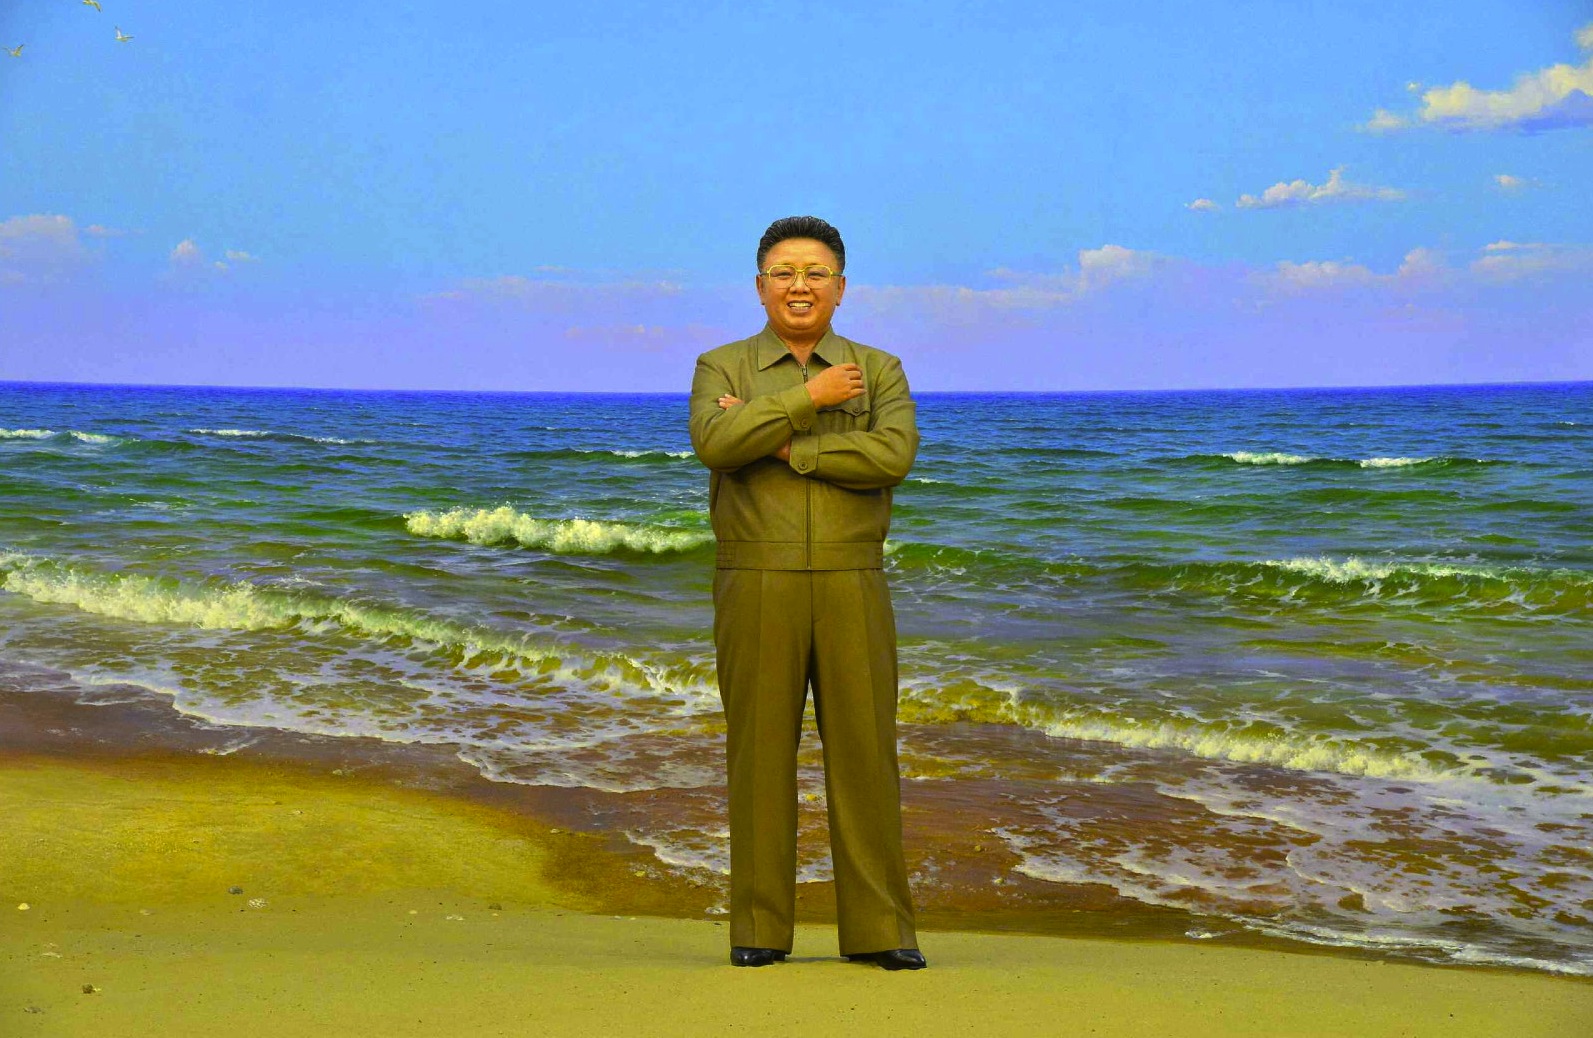 Porn on a beach in Pyongyang